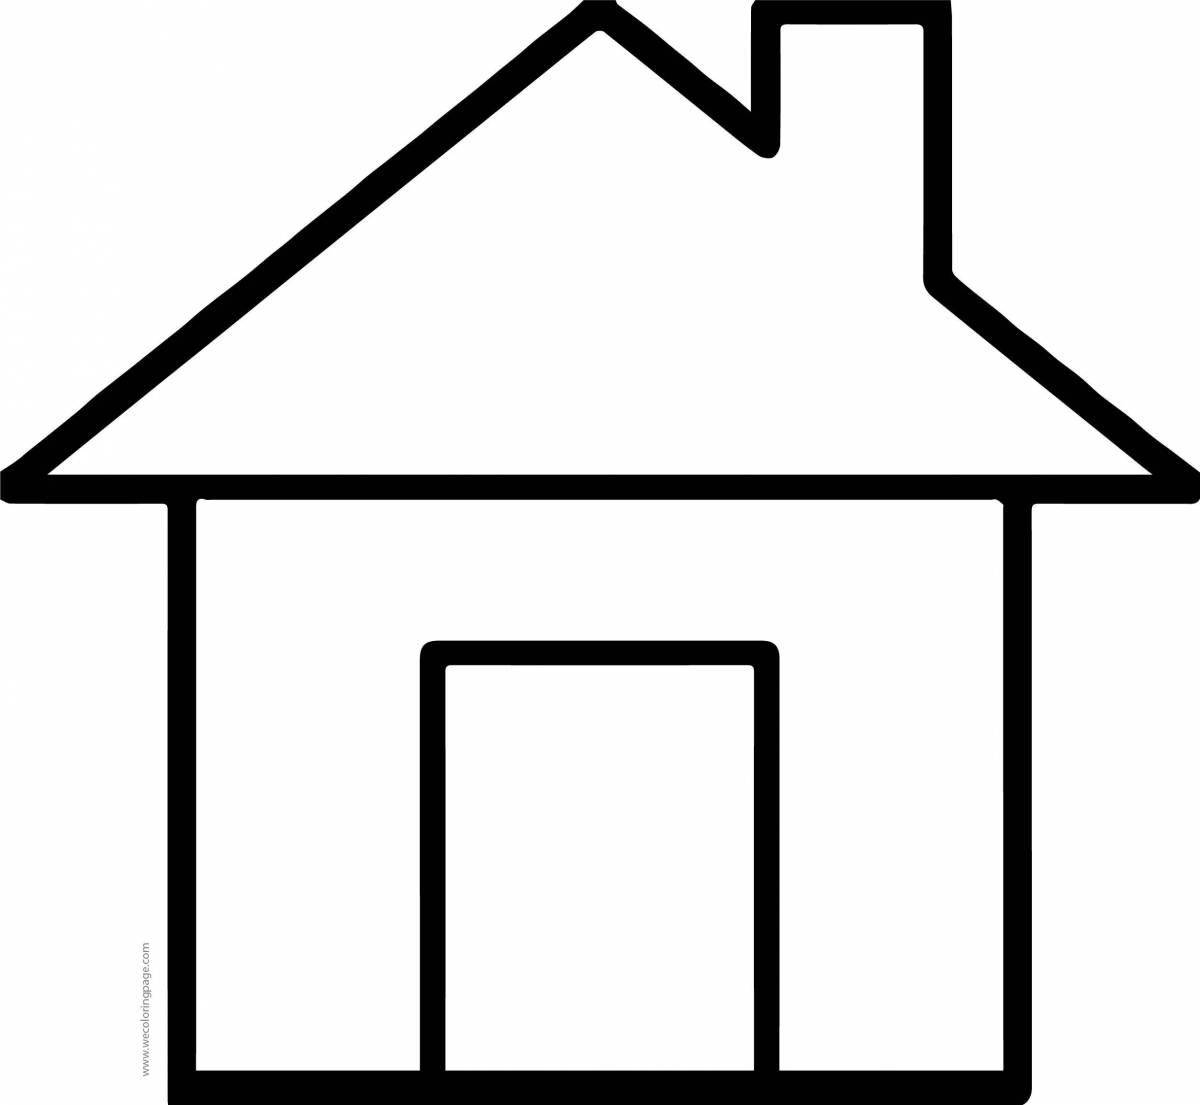 Exciting simple house coloring book for kids